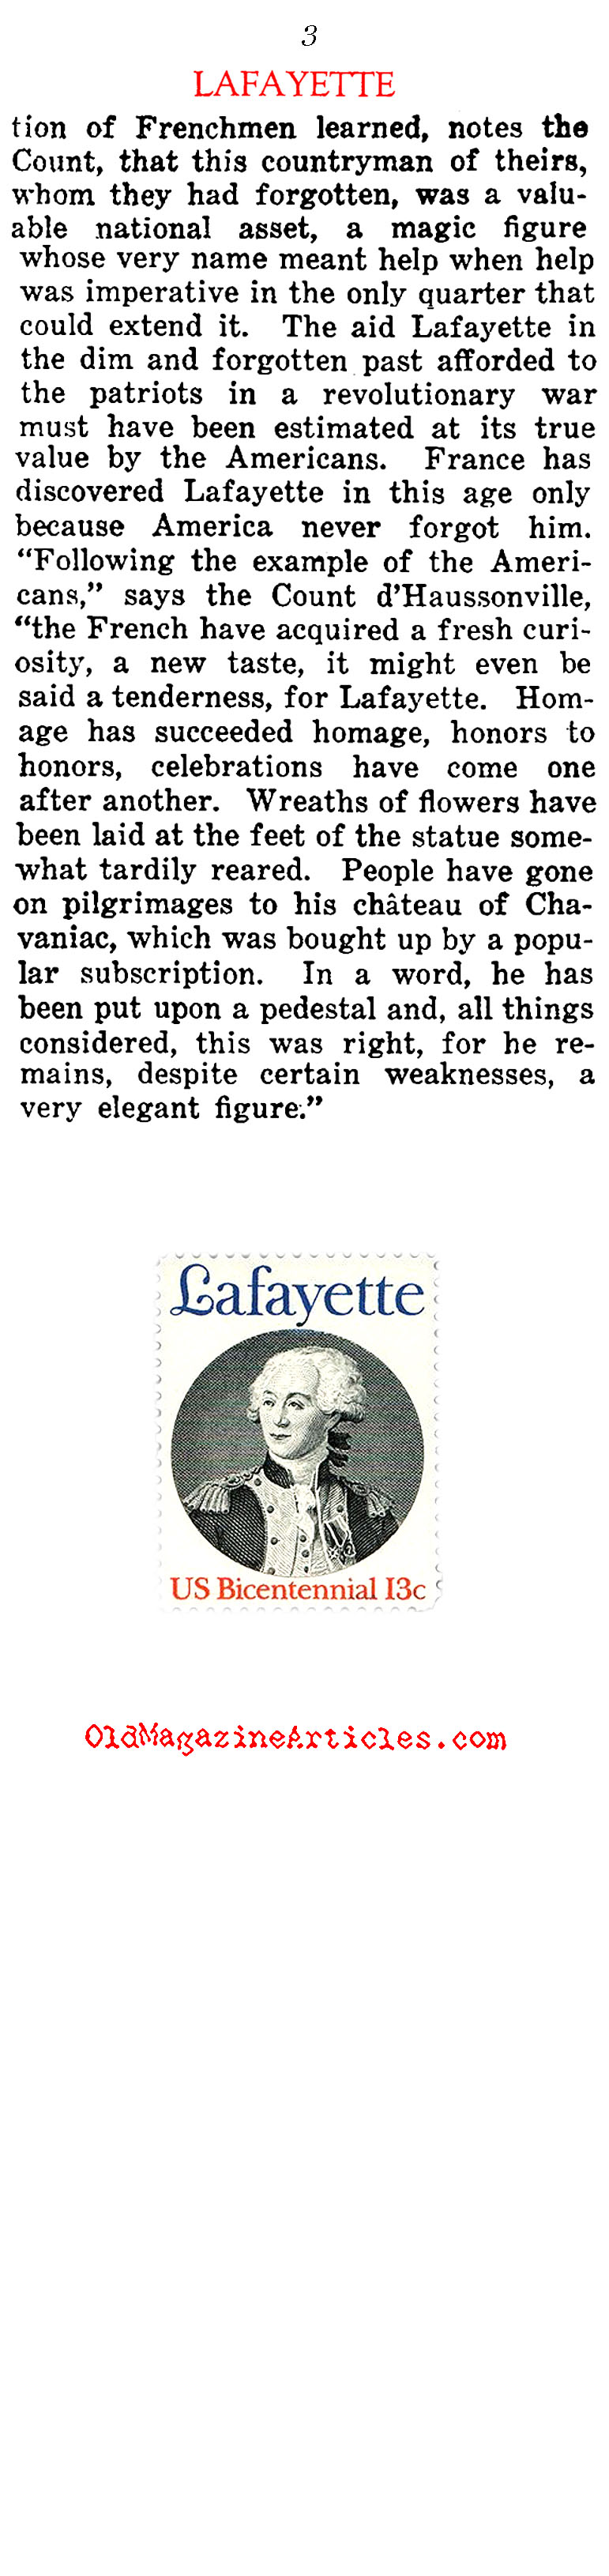 French Amazement at American Esteem of Lafayette (Current Opinion Magazine, 1922)